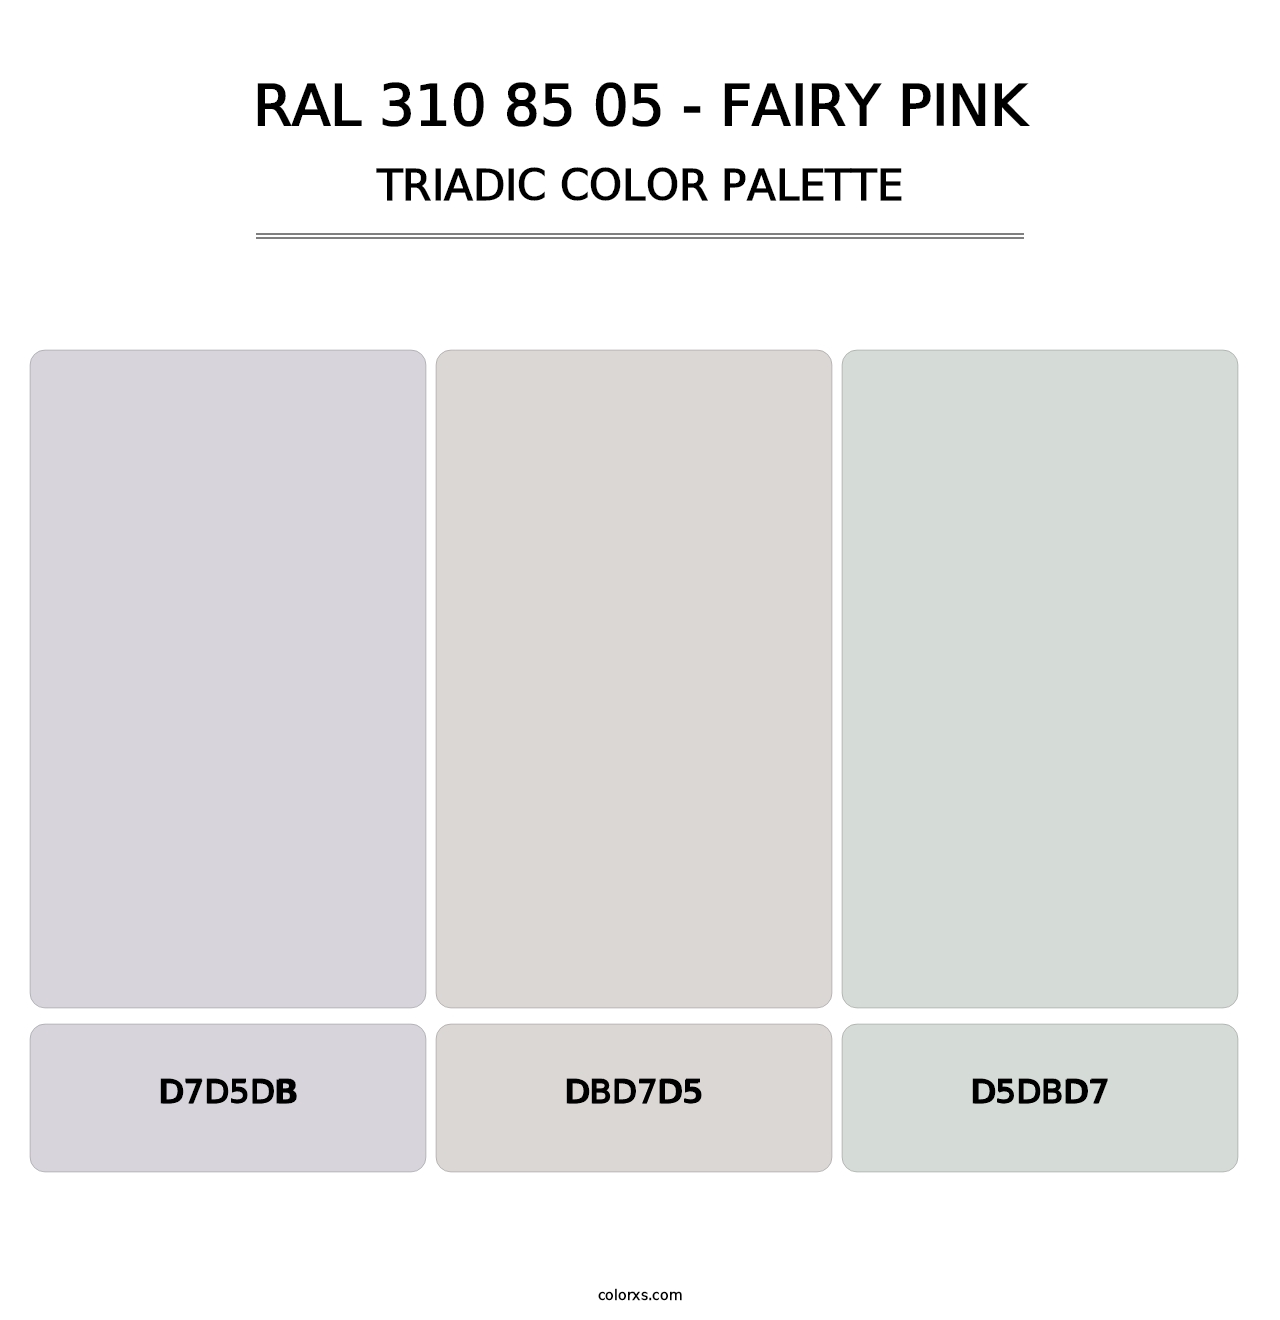 RAL 310 85 05 - Fairy Pink - Triadic Color Palette